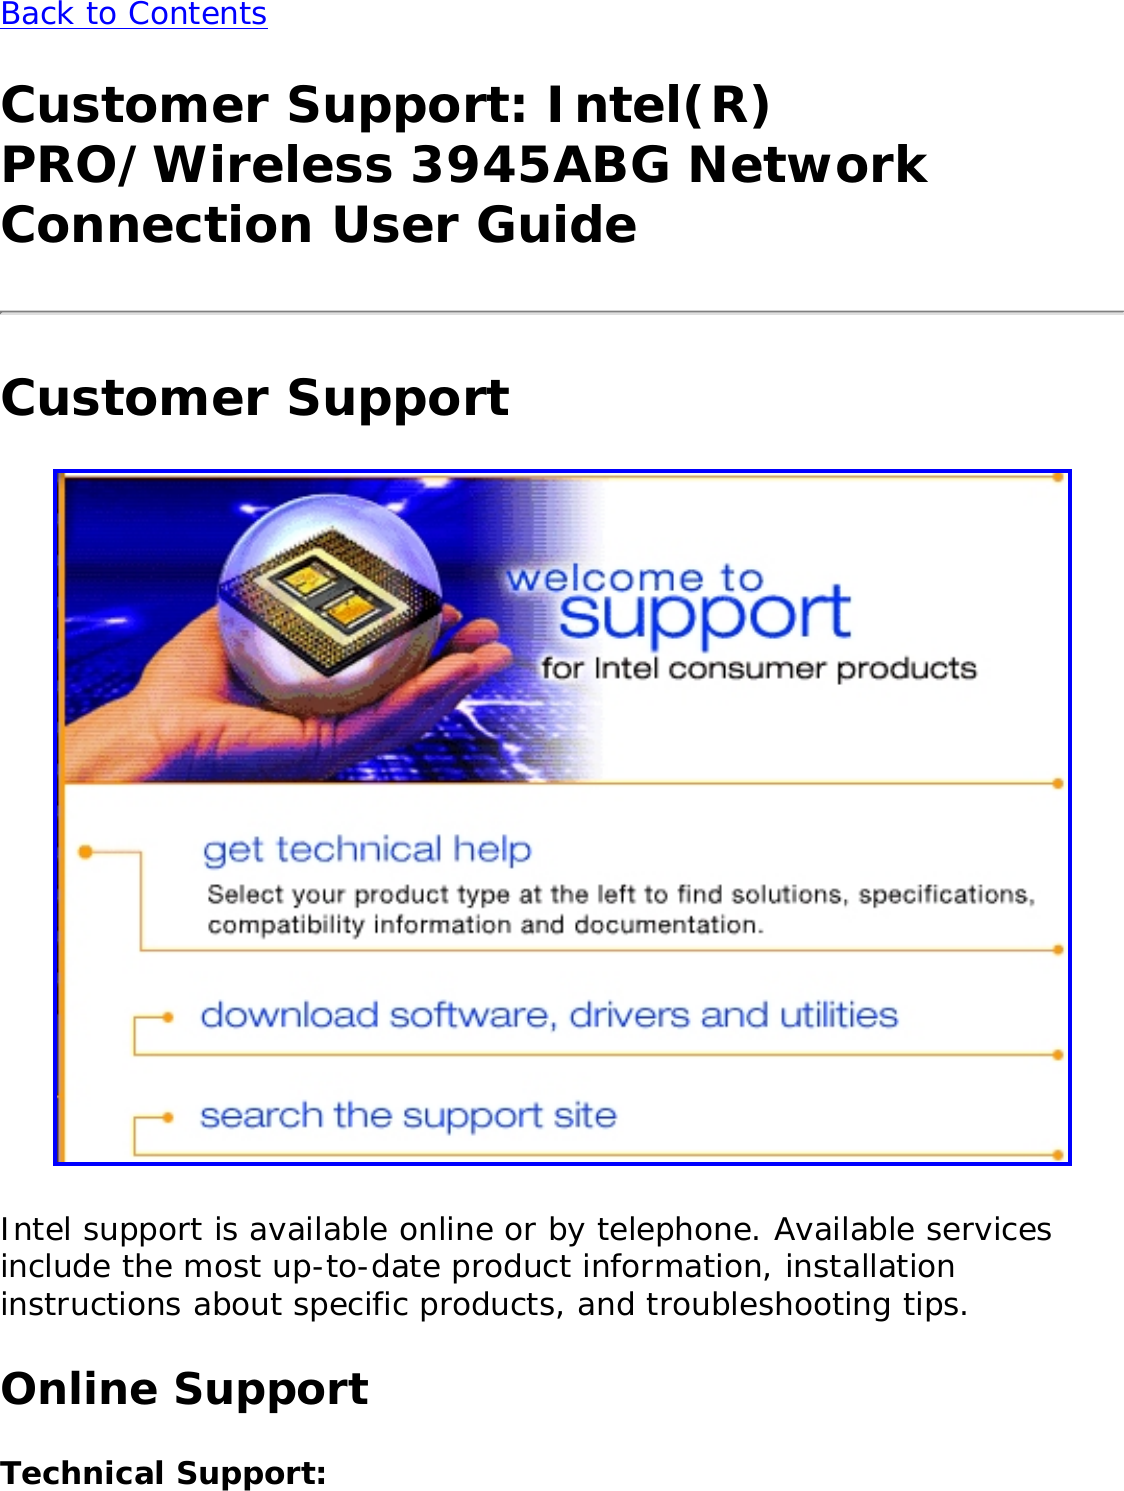 Back to ContentsCustomer Support: Intel(R) PRO/Wireless 3945ABG Network Connection User GuideCustomer Support Intel support is available online or by telephone. Available services include the most up-to-date product information, installation instructions about specific products, and troubleshooting tips. Online SupportTechnical Support: 